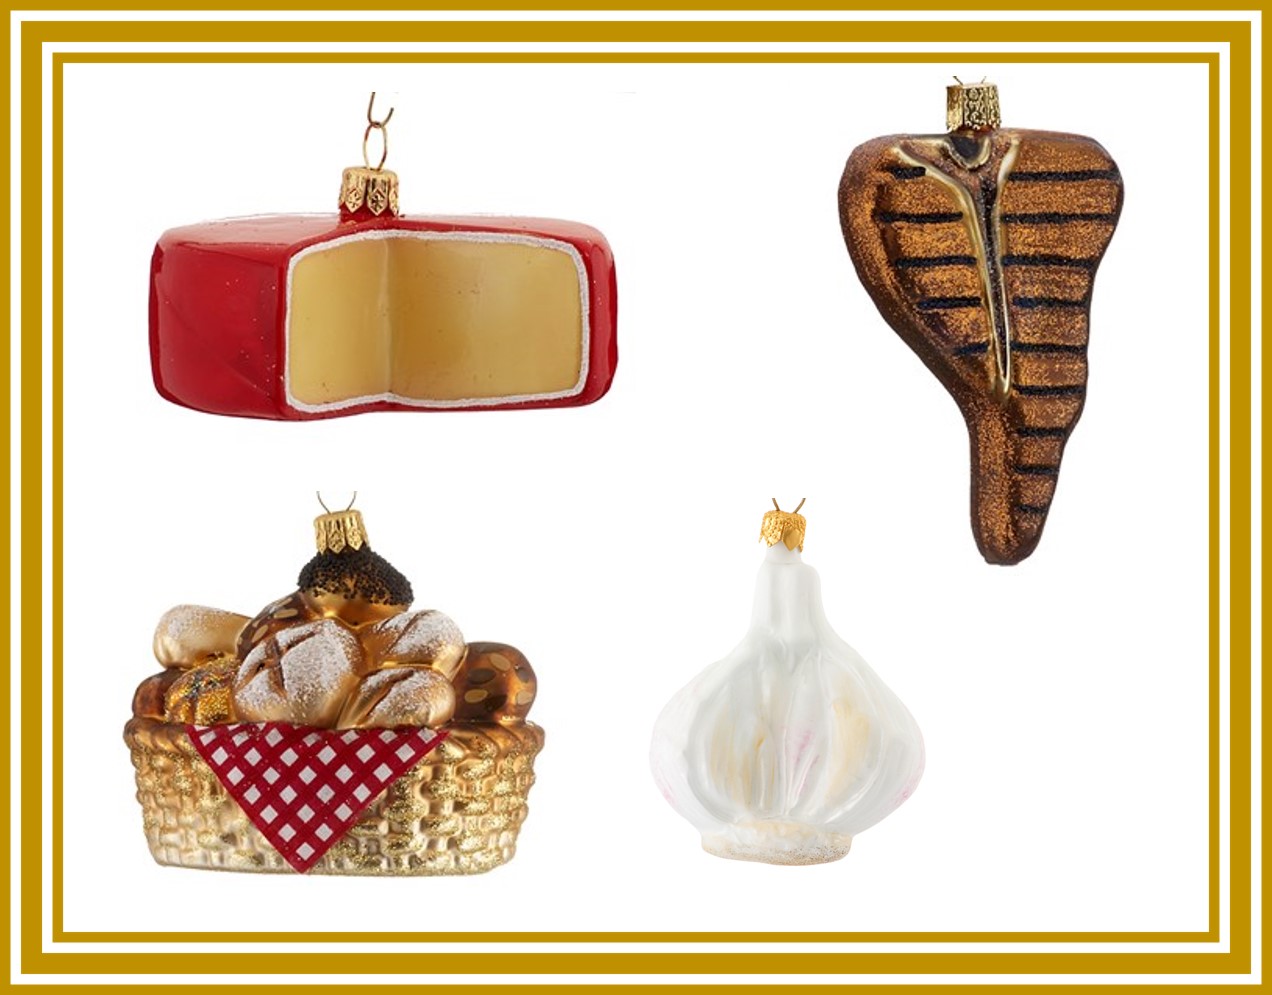 Ornaments of food that is popular for Christmas in the Netherlands including cheese, garlic, steak and bread. | OrnamentShop.com